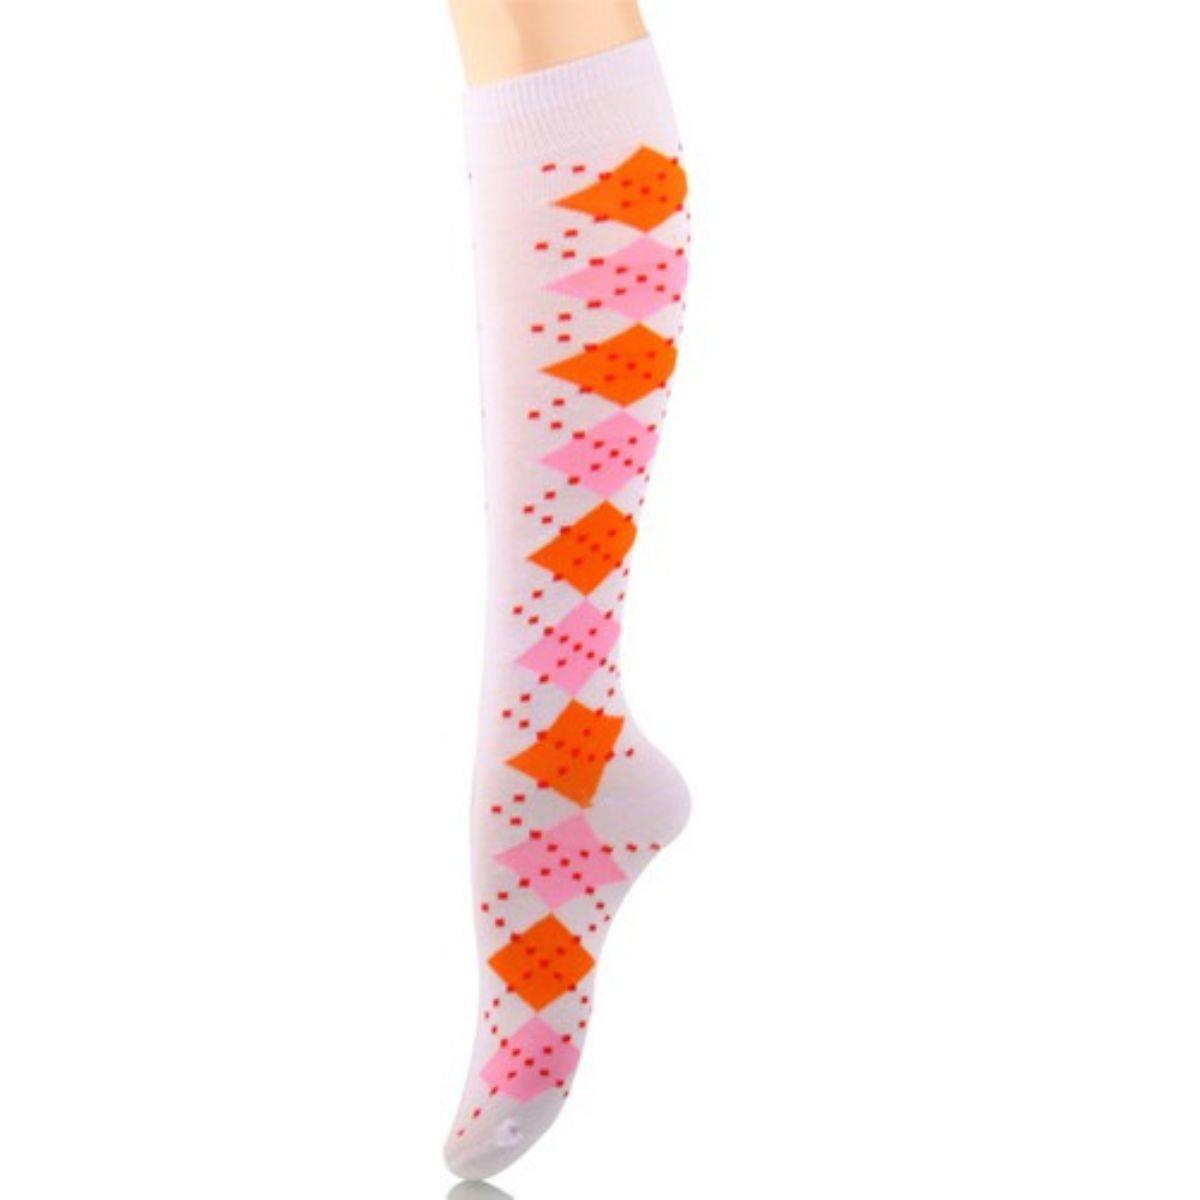 Get Noticed in Fun White Women's Socks with Dotted-Line Argyle